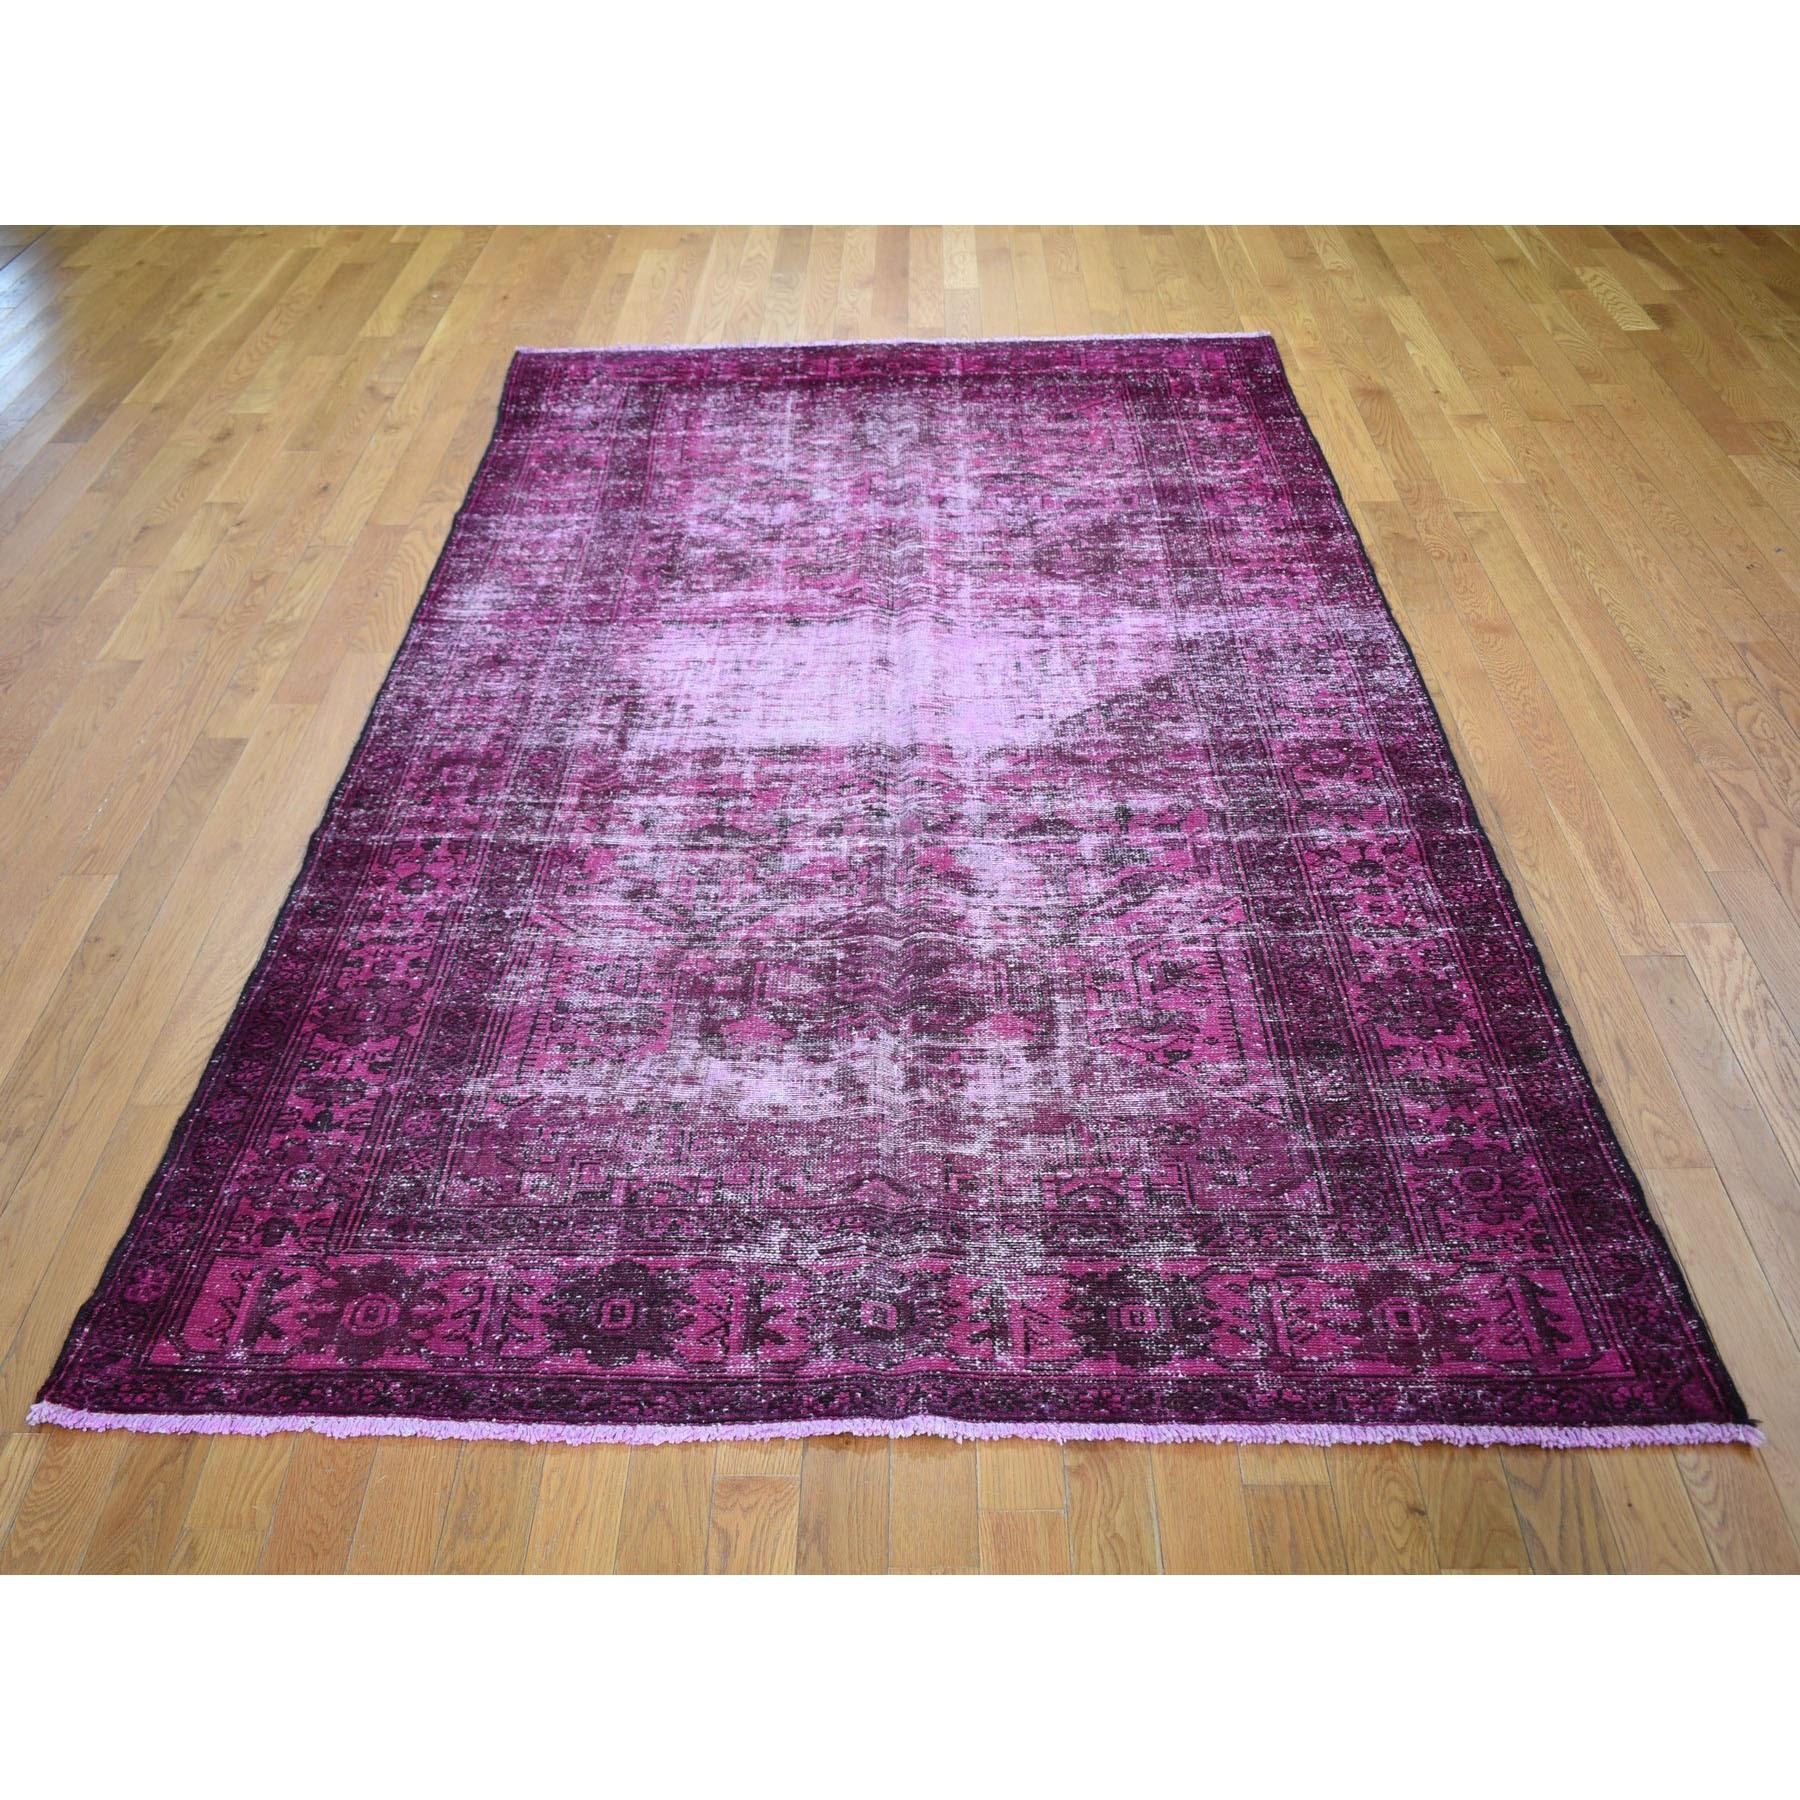 This fabulous hand-knotted carpet has been created and designed for extra strength and durability. This rug has been handcrafted for weeks in the traditional method that is used to make
Exact Rug Size in Feet and Inches : 5'5